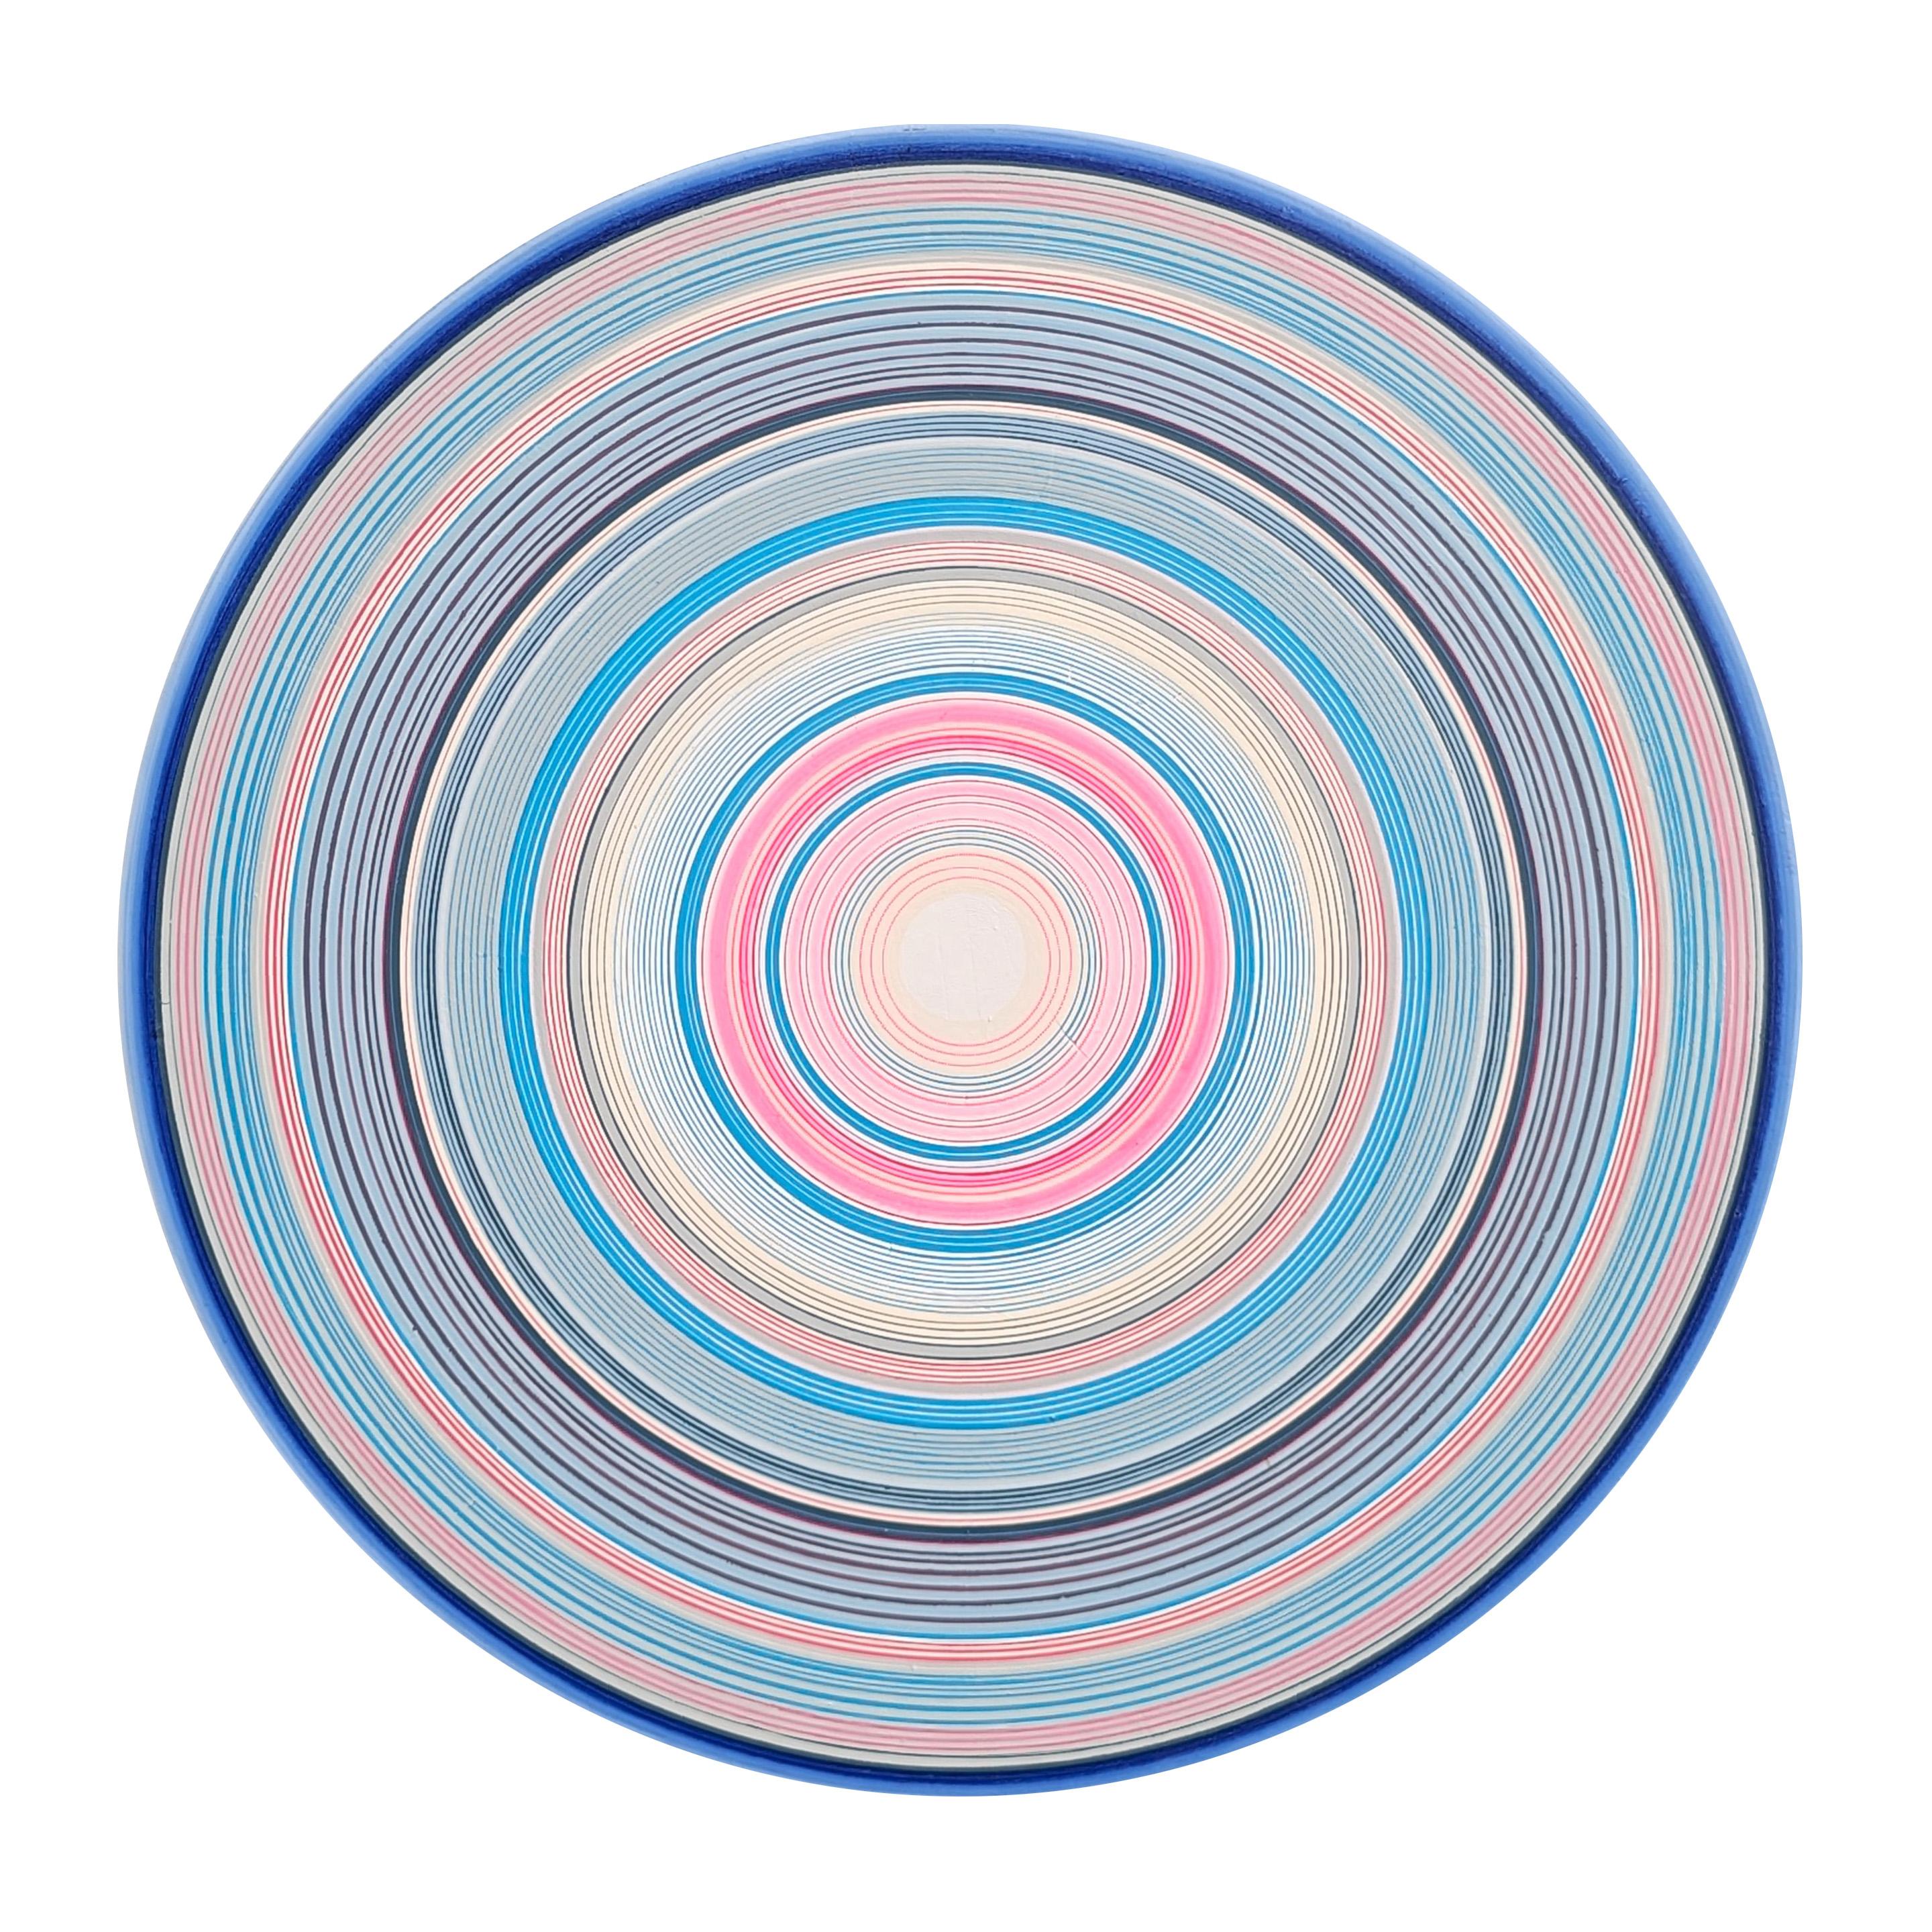 "Threads" Contemporary Abstract Blue, Pink, & White Concentric Circle Painting